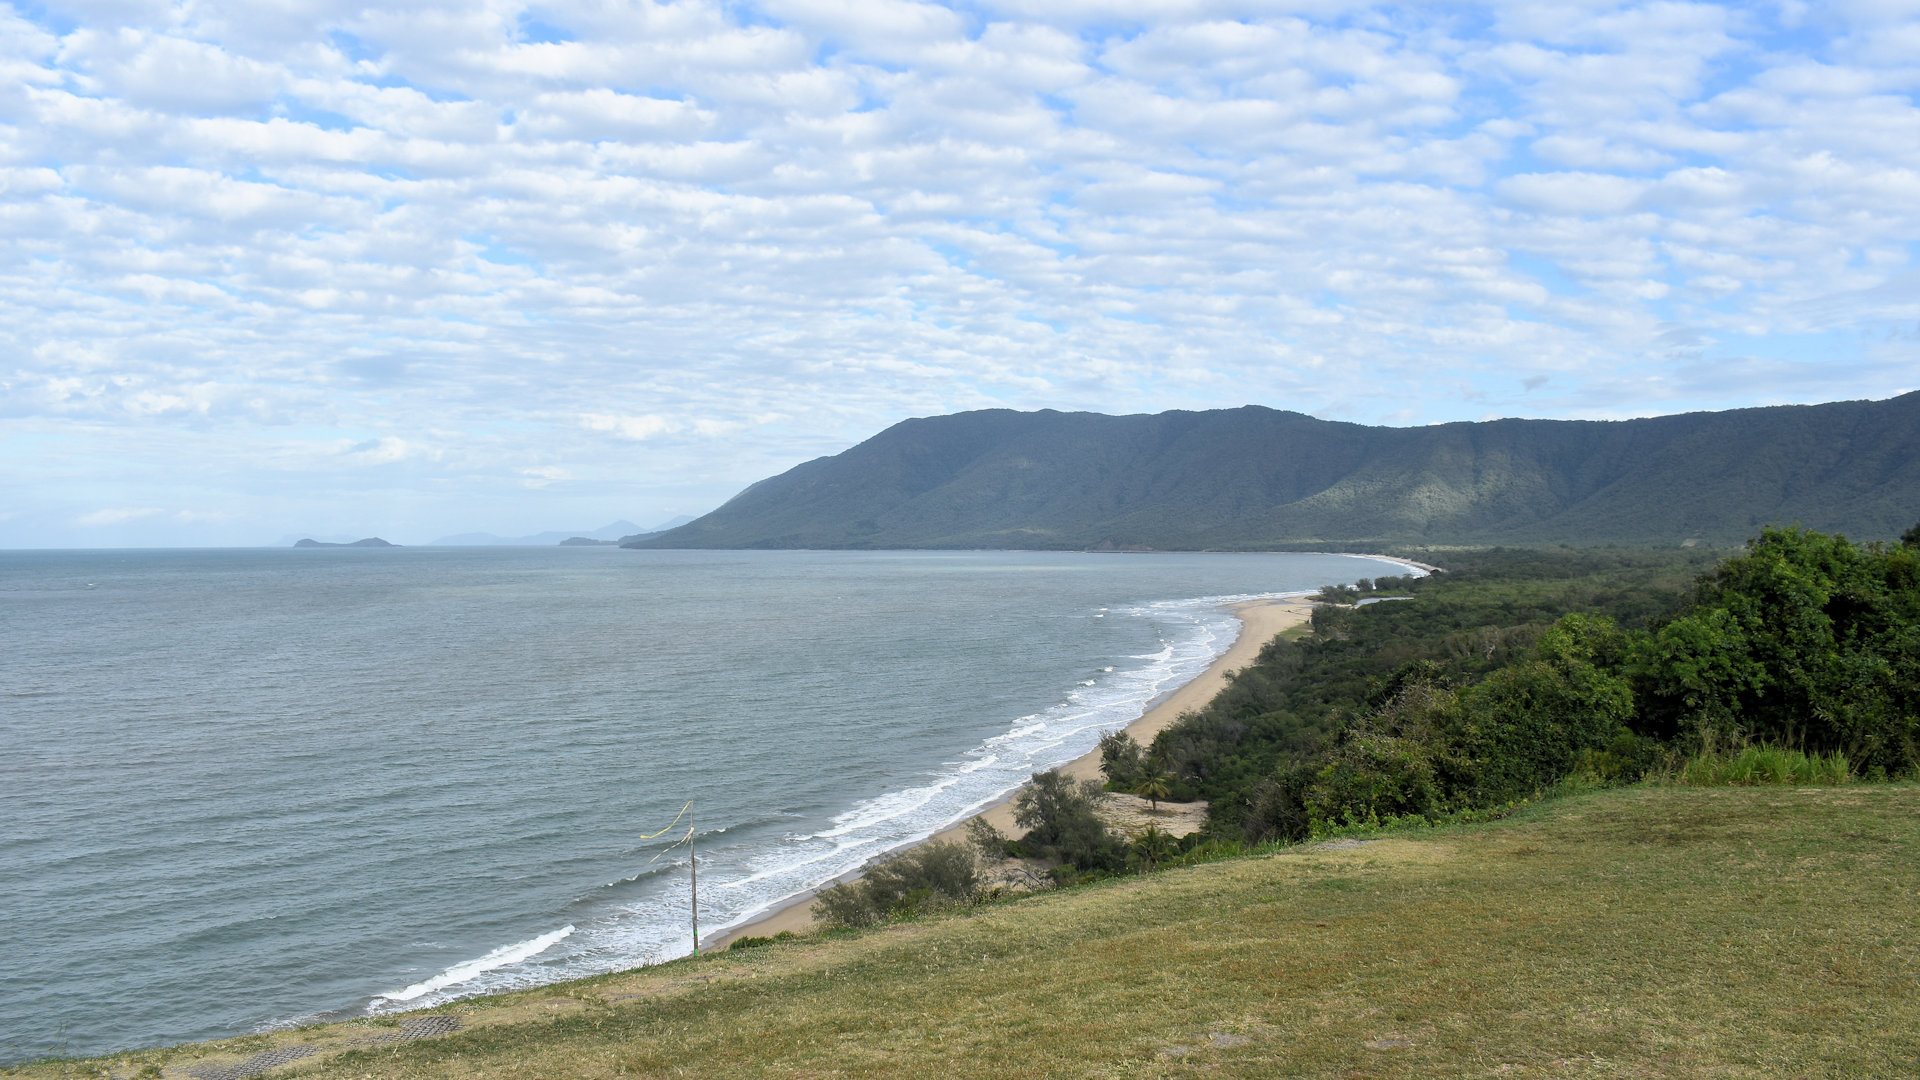 View from Rex Lookout looking south towards Clifton Beach and Palm Cove headland